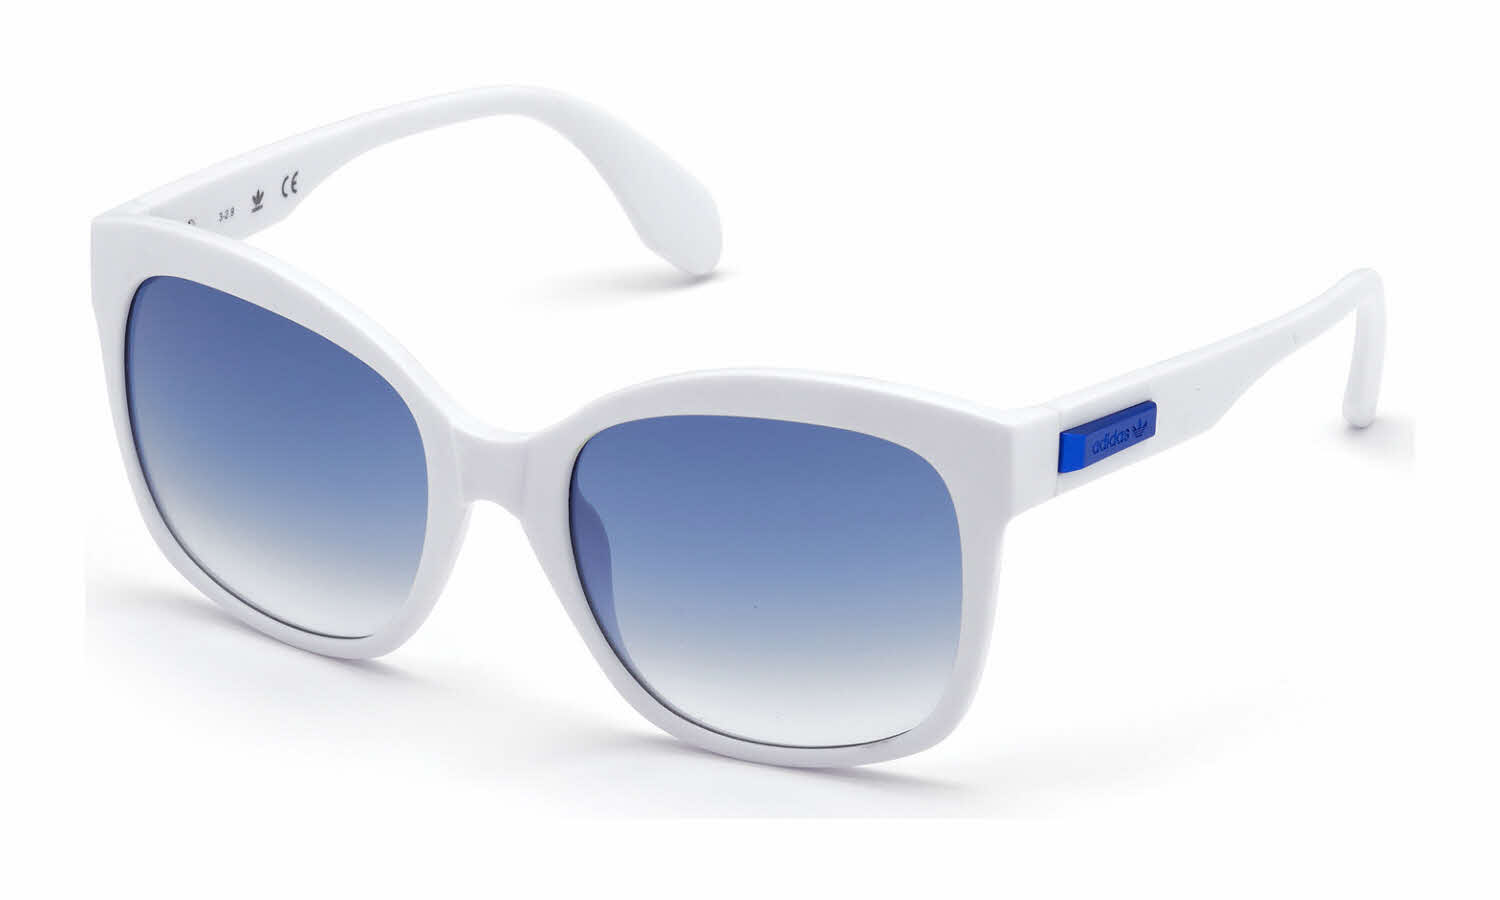 Adidas OR0012 Women's Sunglasses In White